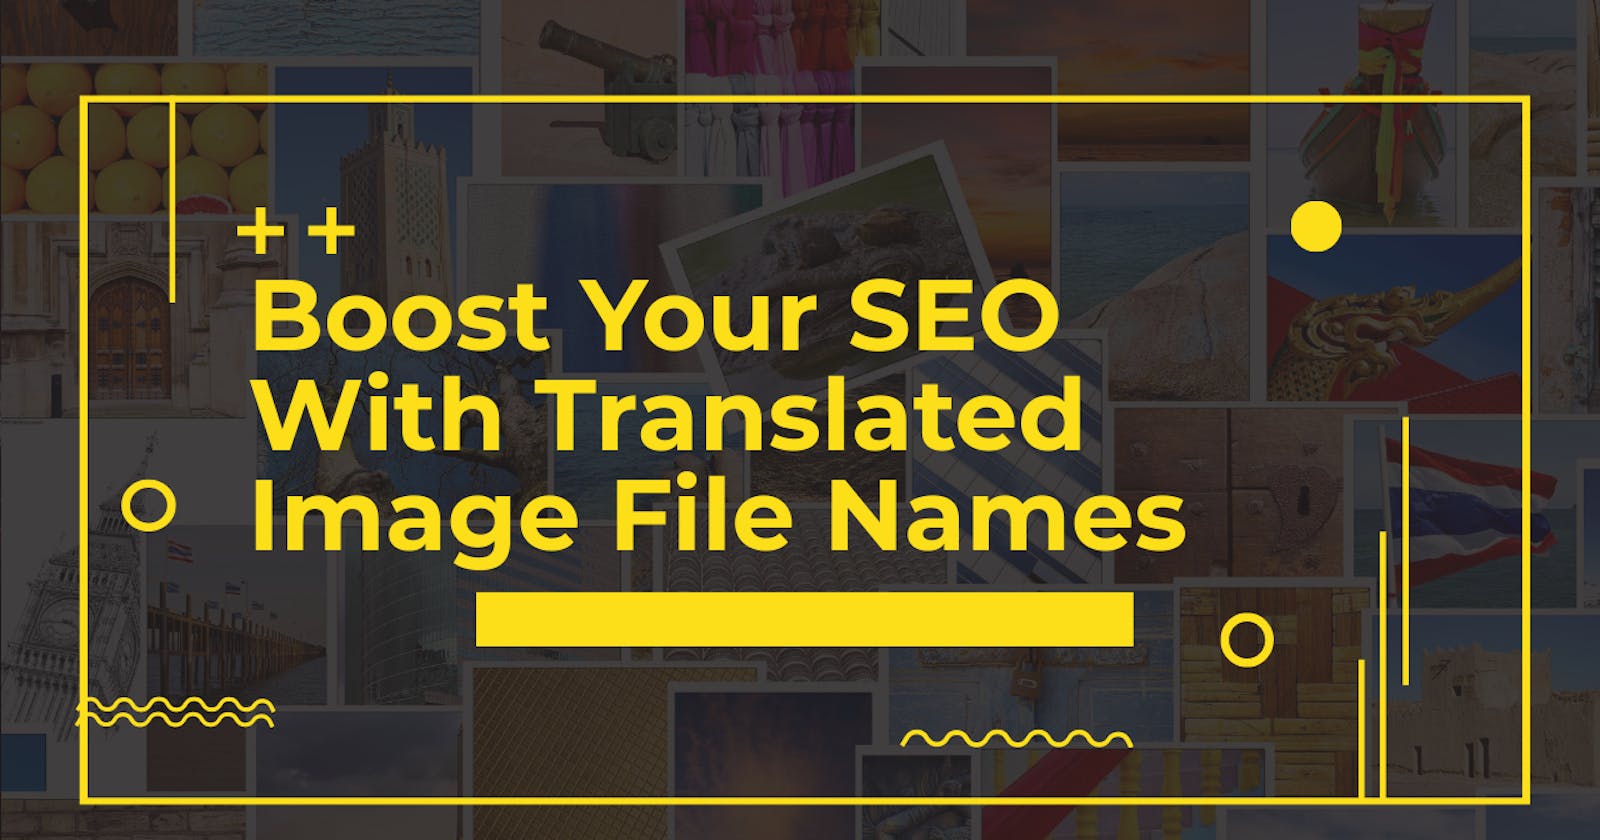 Boost Your SEO With Translated Image File Names